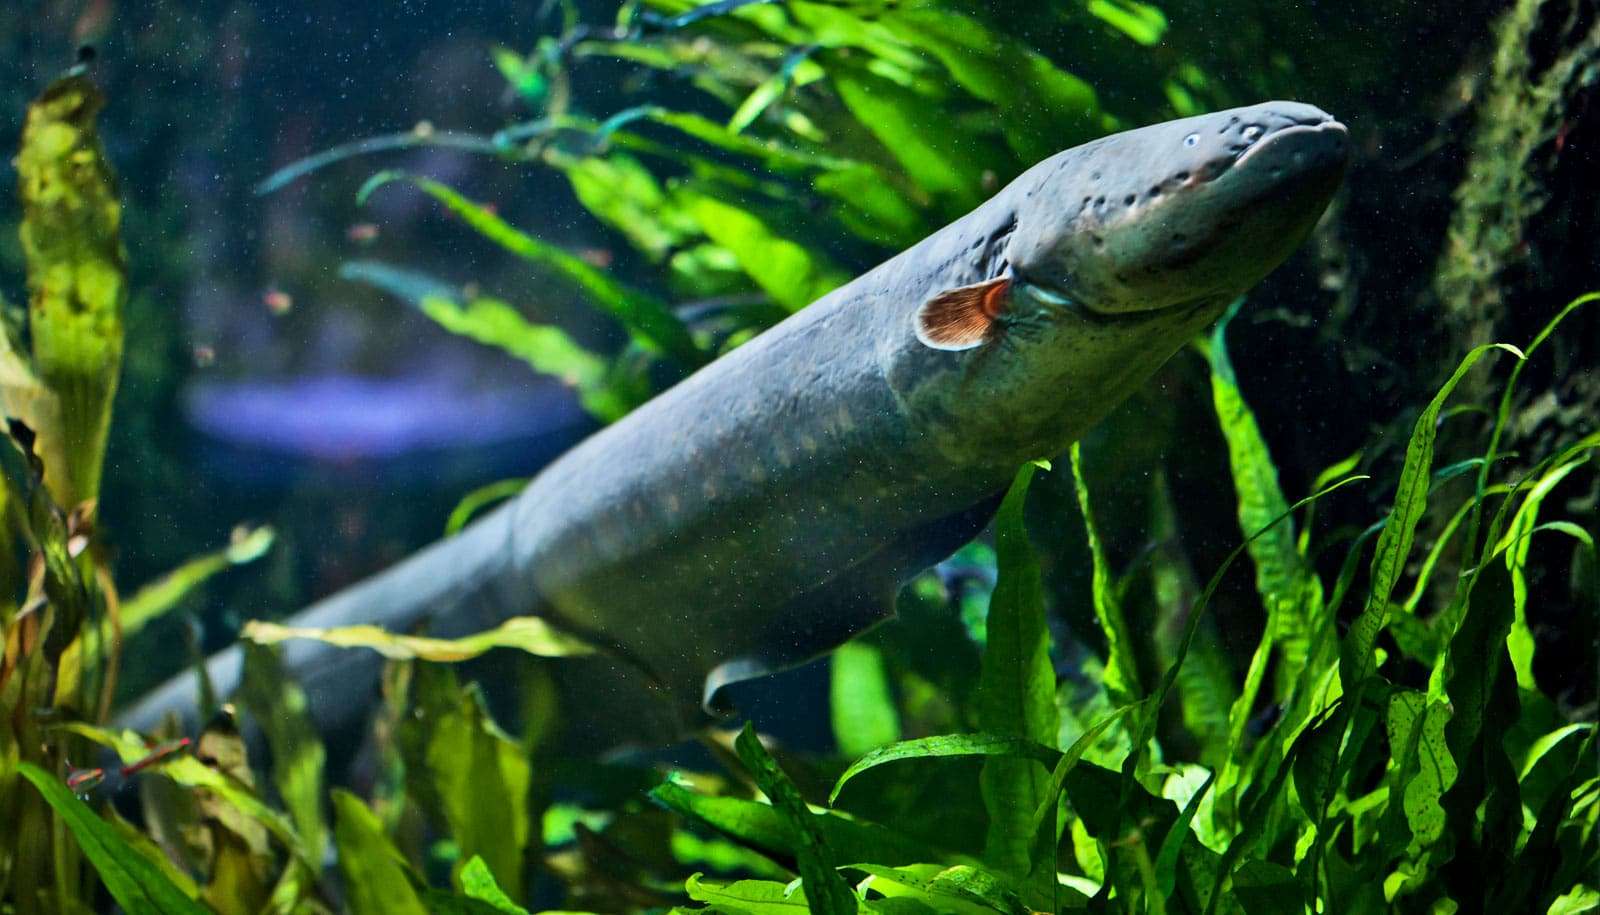 What Do Freshwater Eels Eat